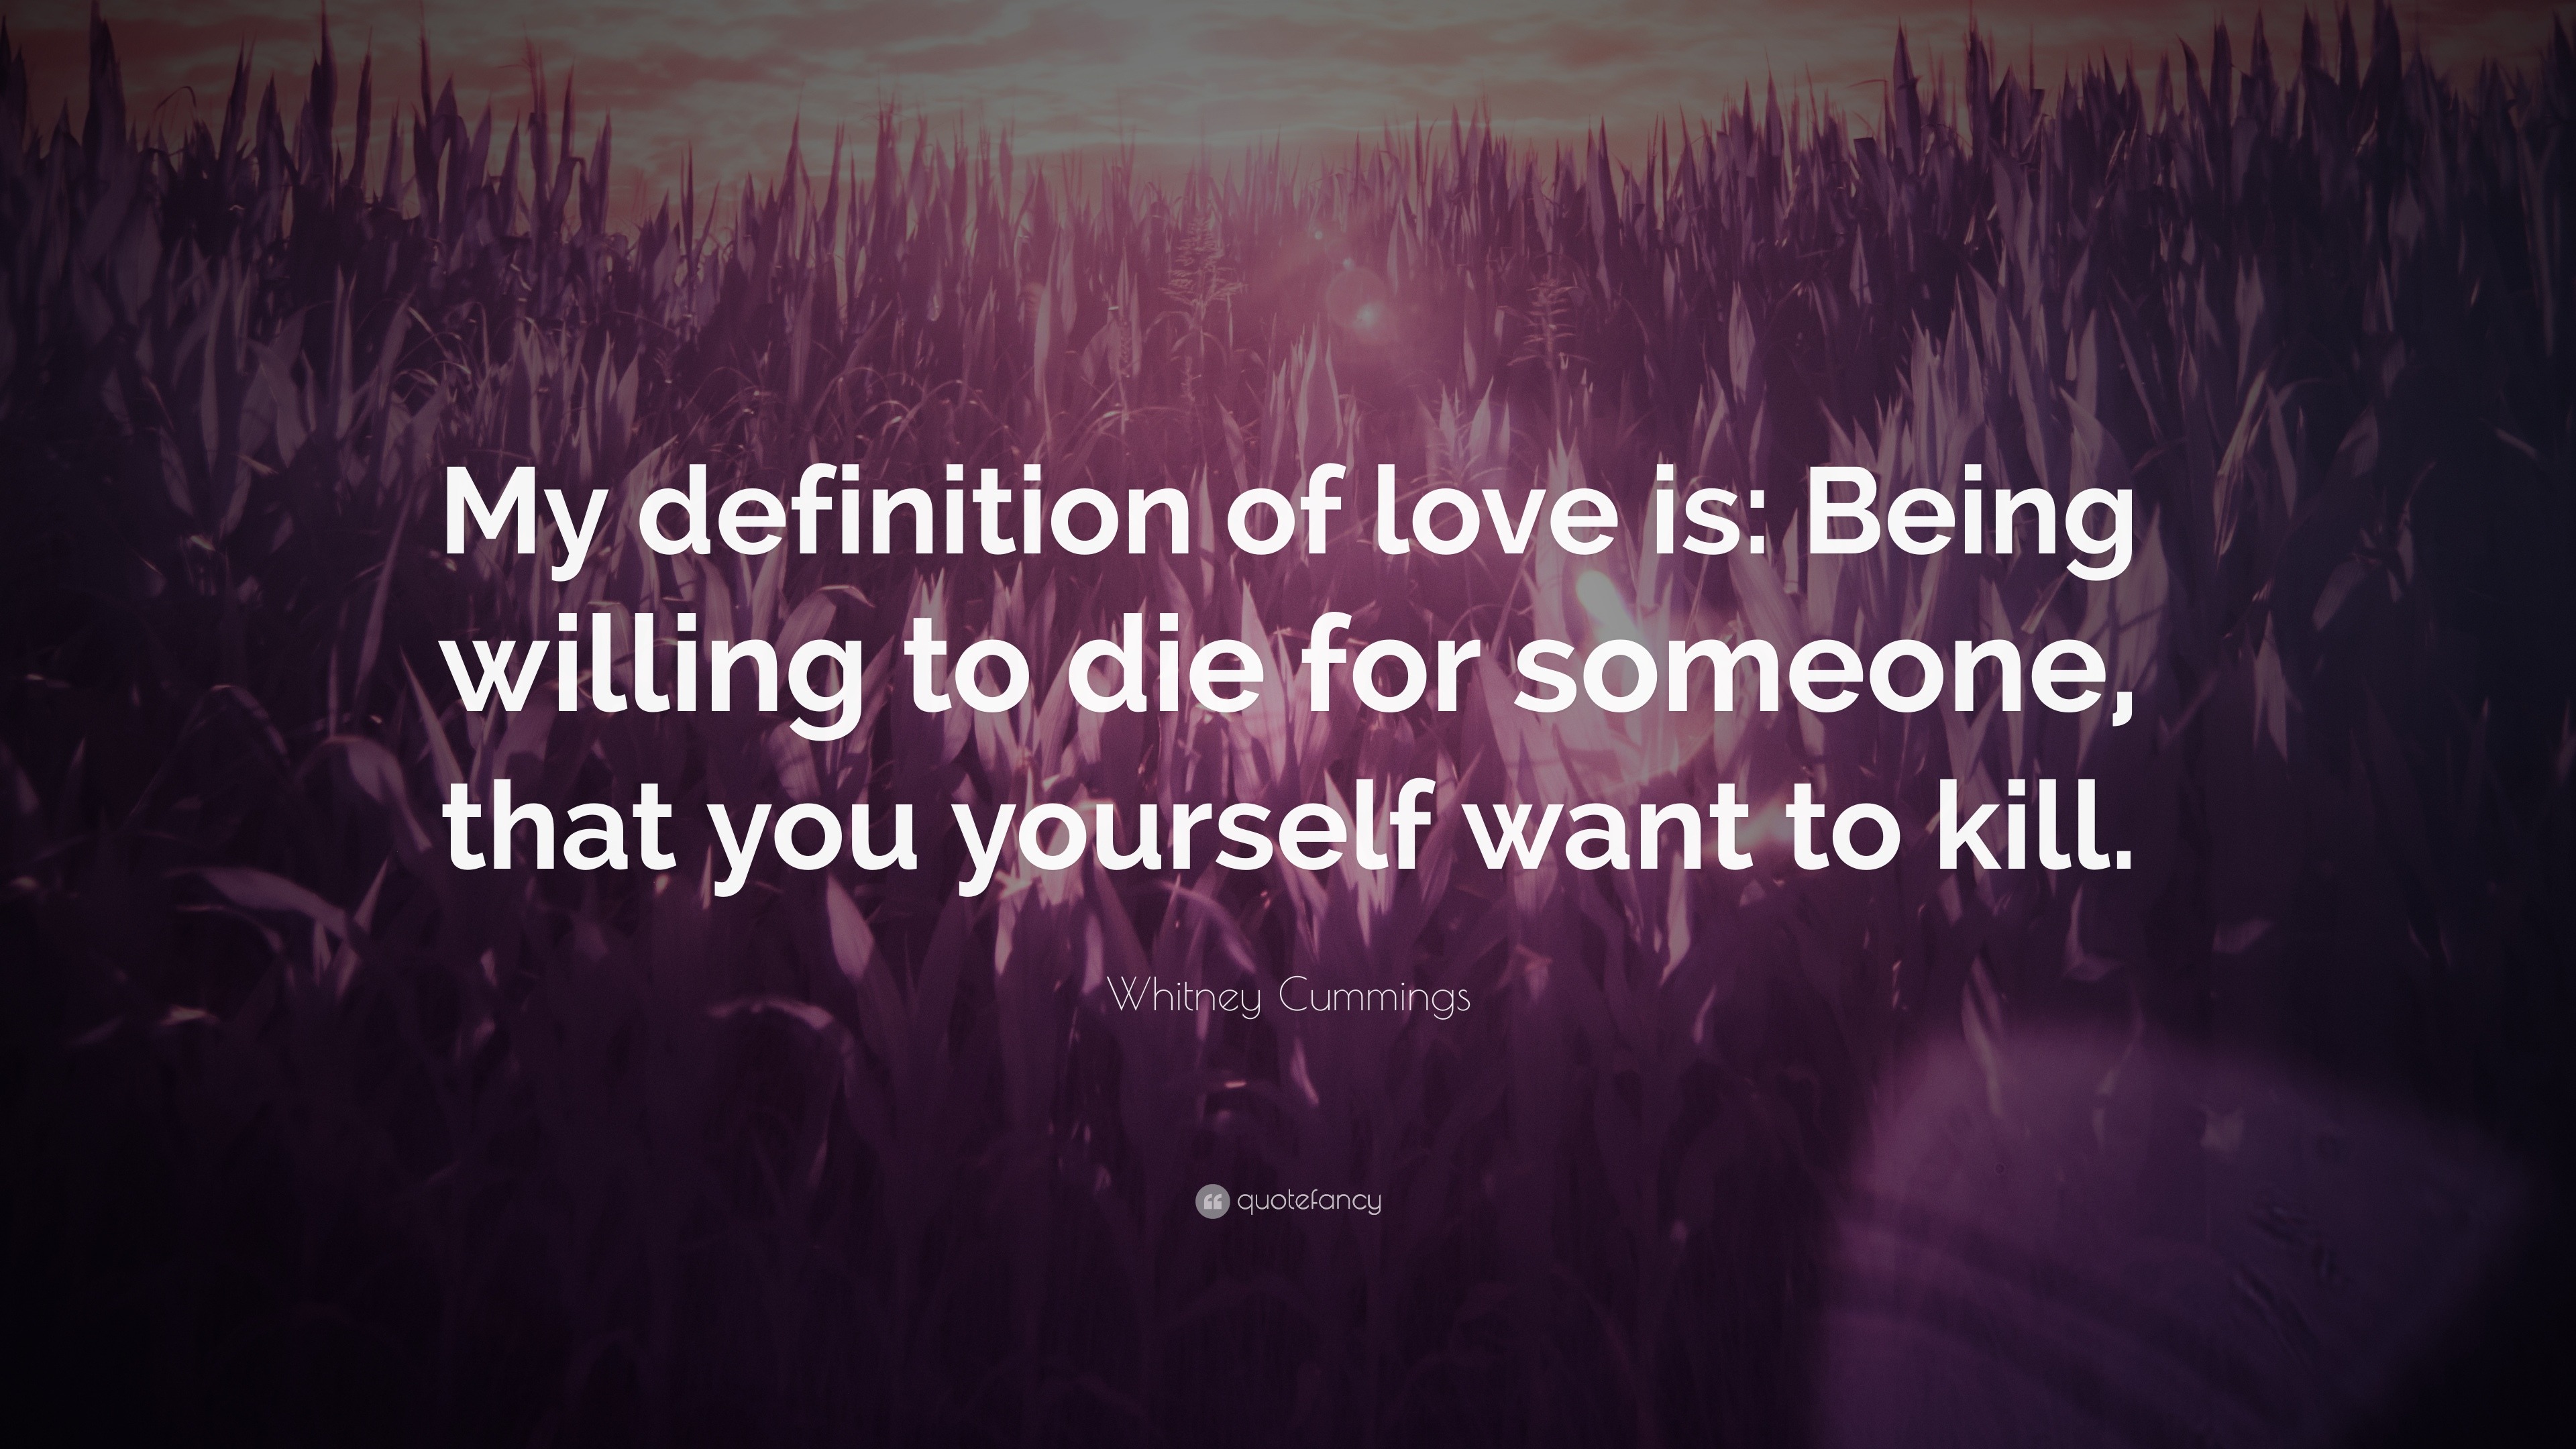 Whitney Cummings Quote “My definition of love is Being willing to for